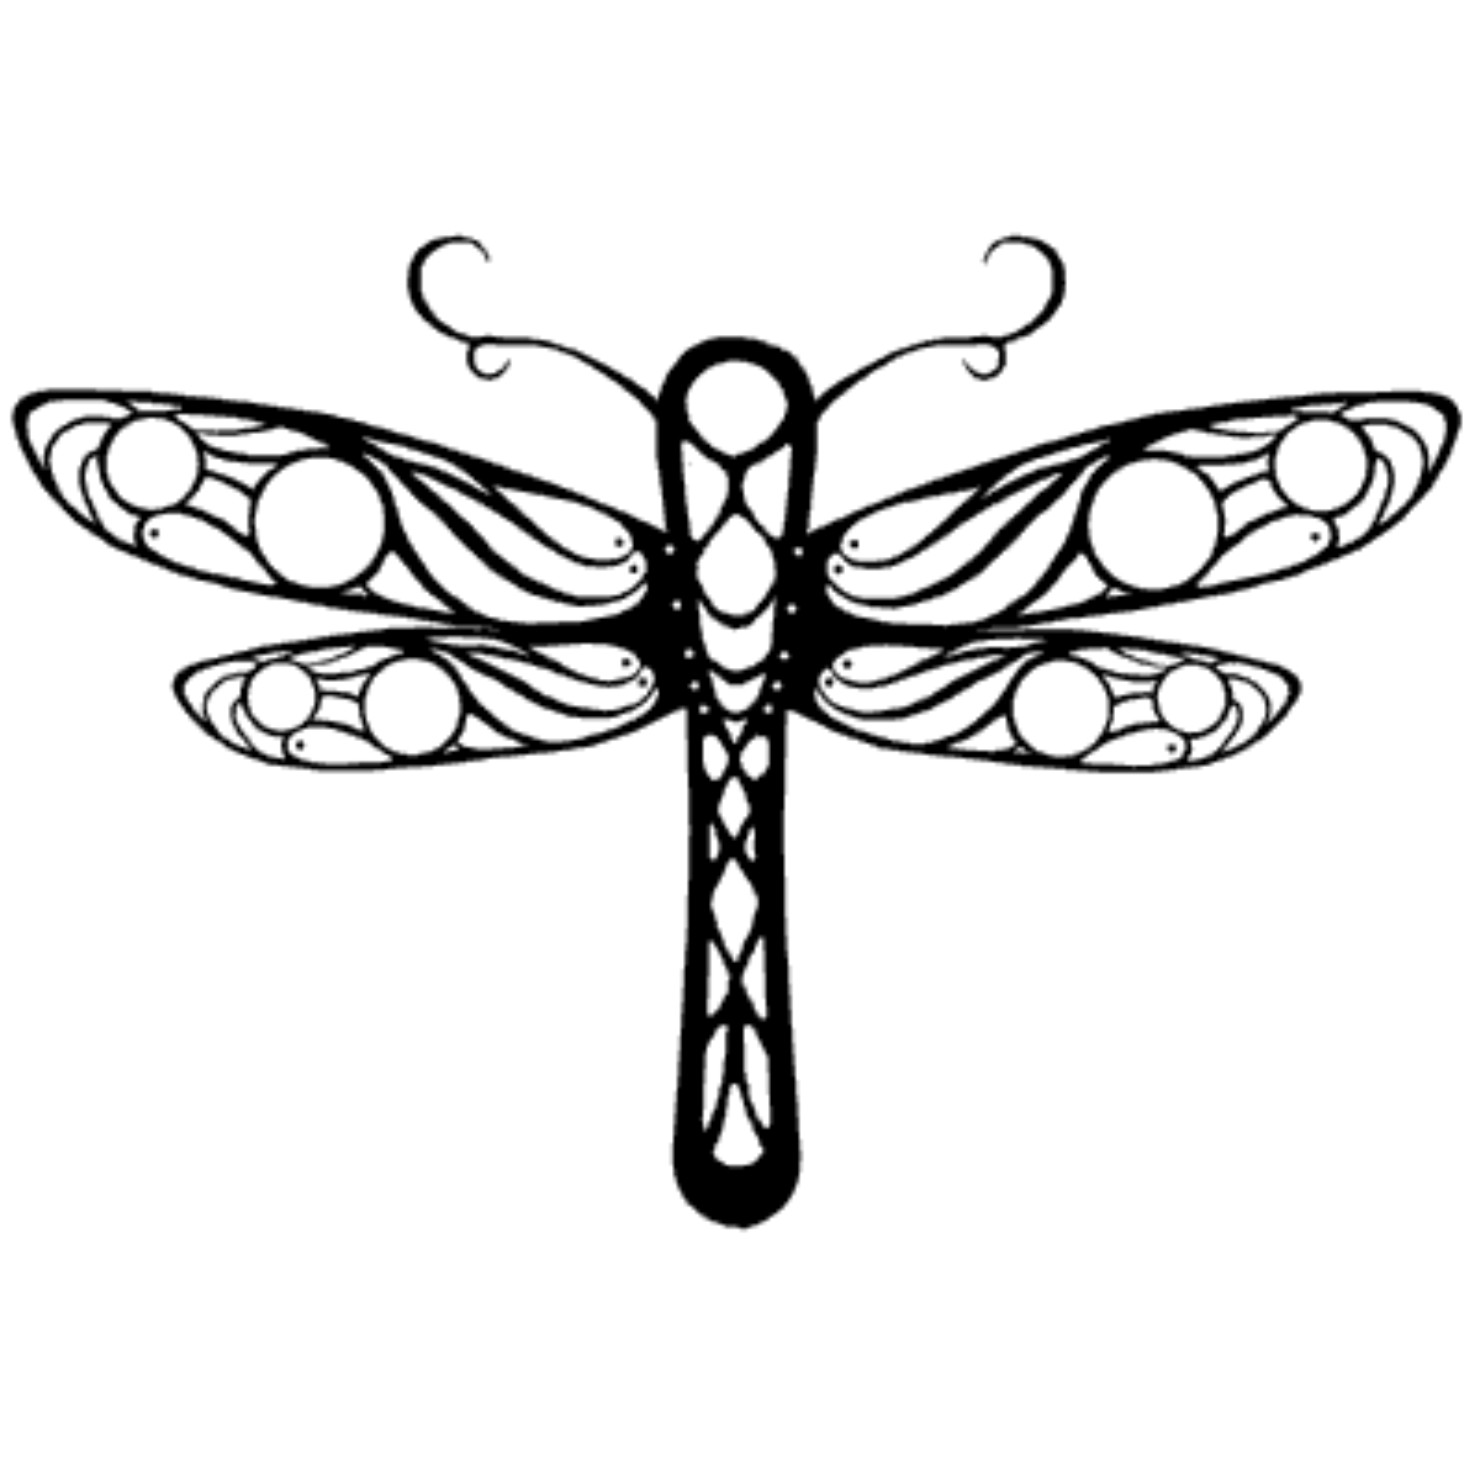 dragonfly clipart free download - photo #34